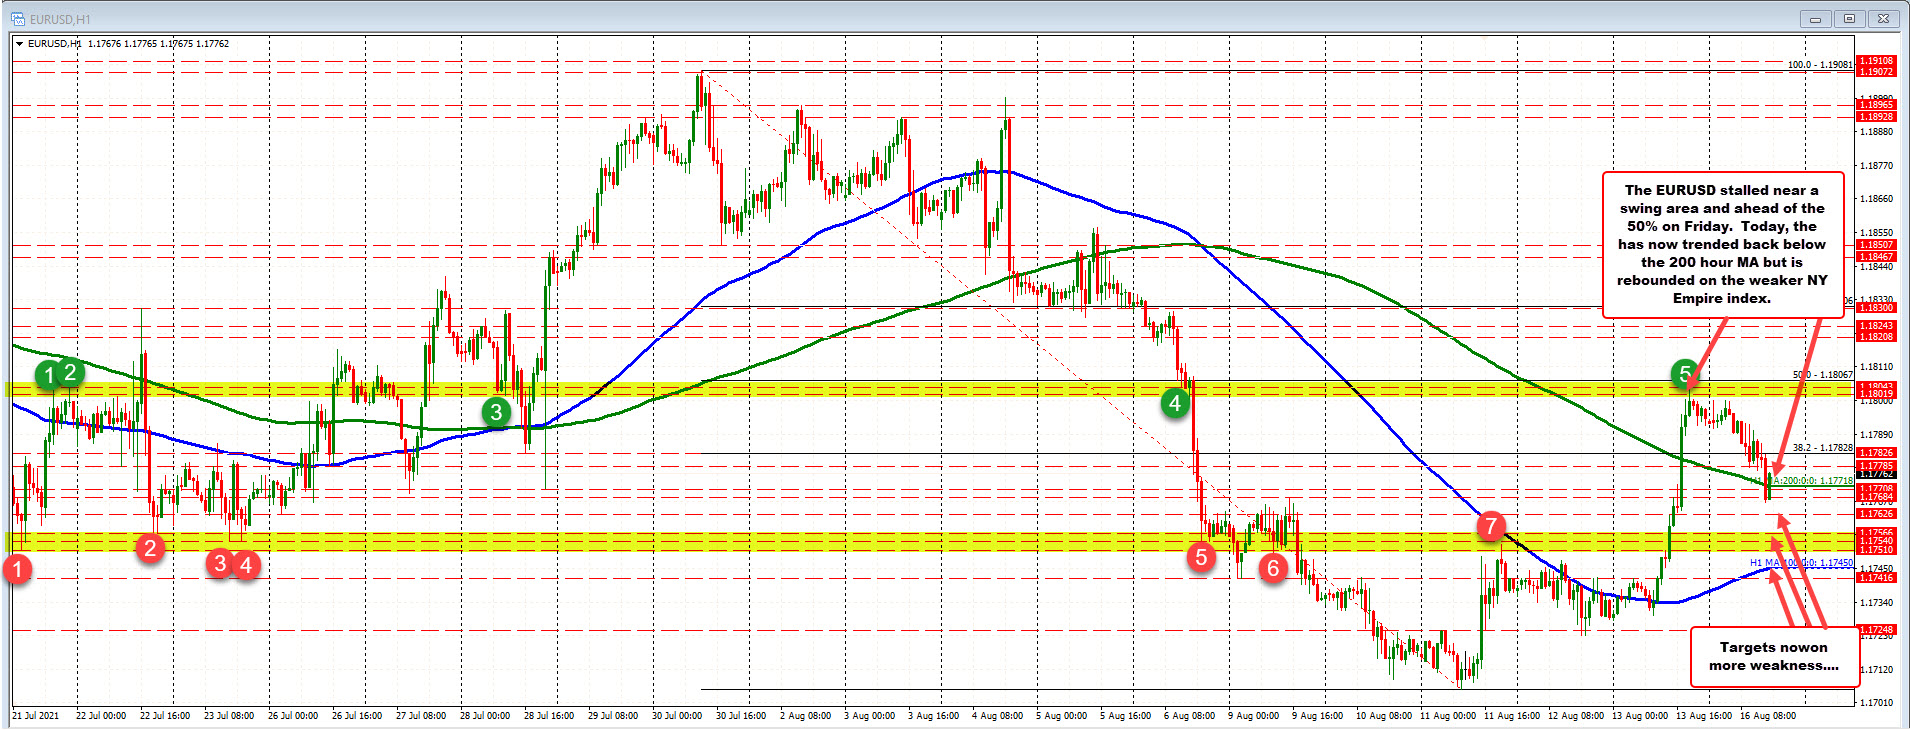 Flight into the USD sends EURUSD lower, but being offset by weaker Empire manufacturing data_